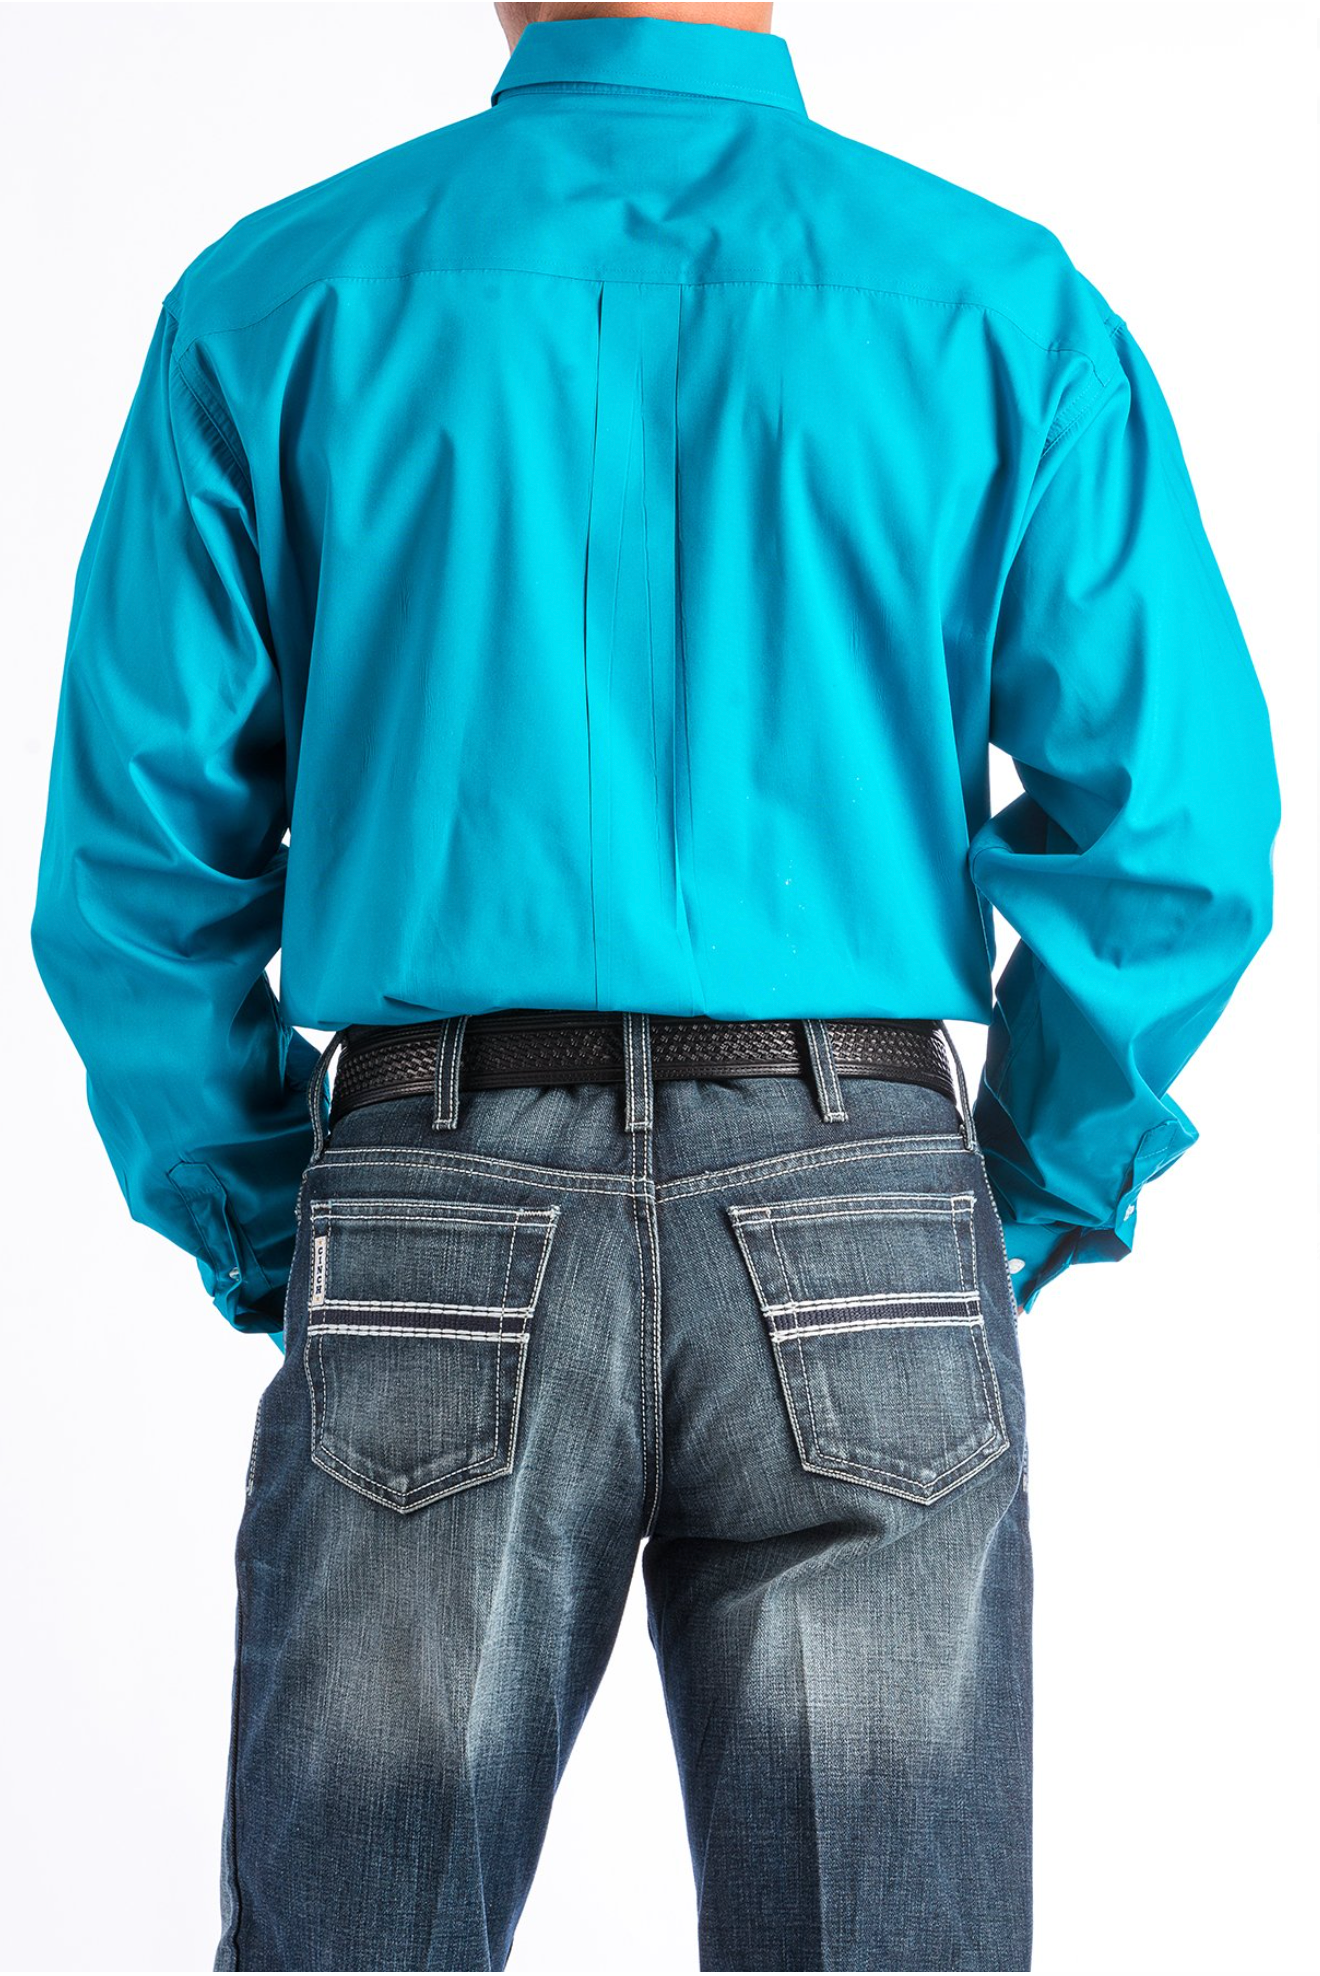 Cinch Mens Solid Down Solid Teal